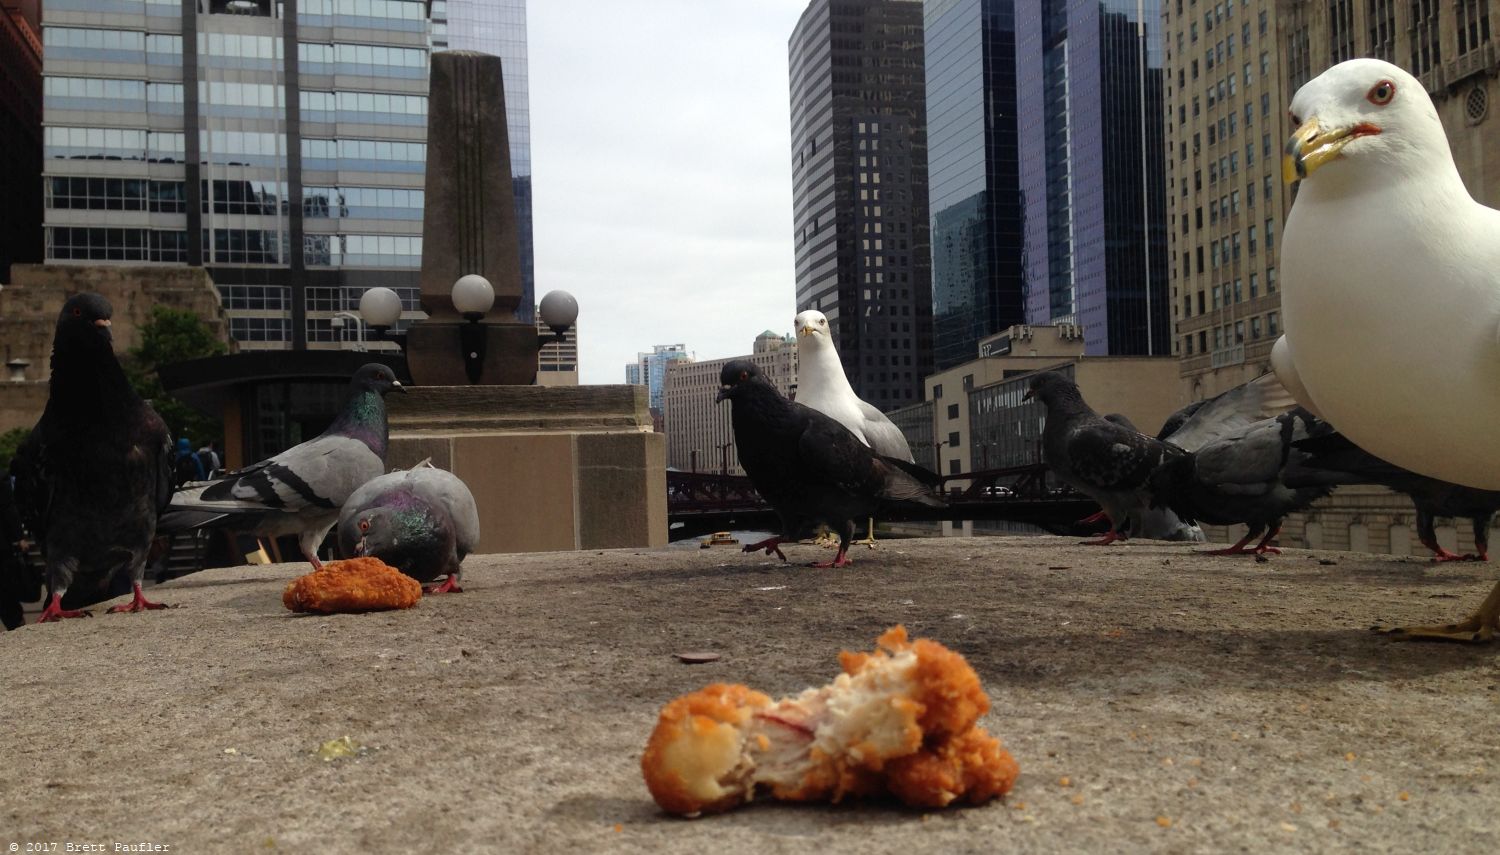 Pigeons on a concrete pilon eating pieces of bird flesh, as in, chicken, I like the juxtaposition